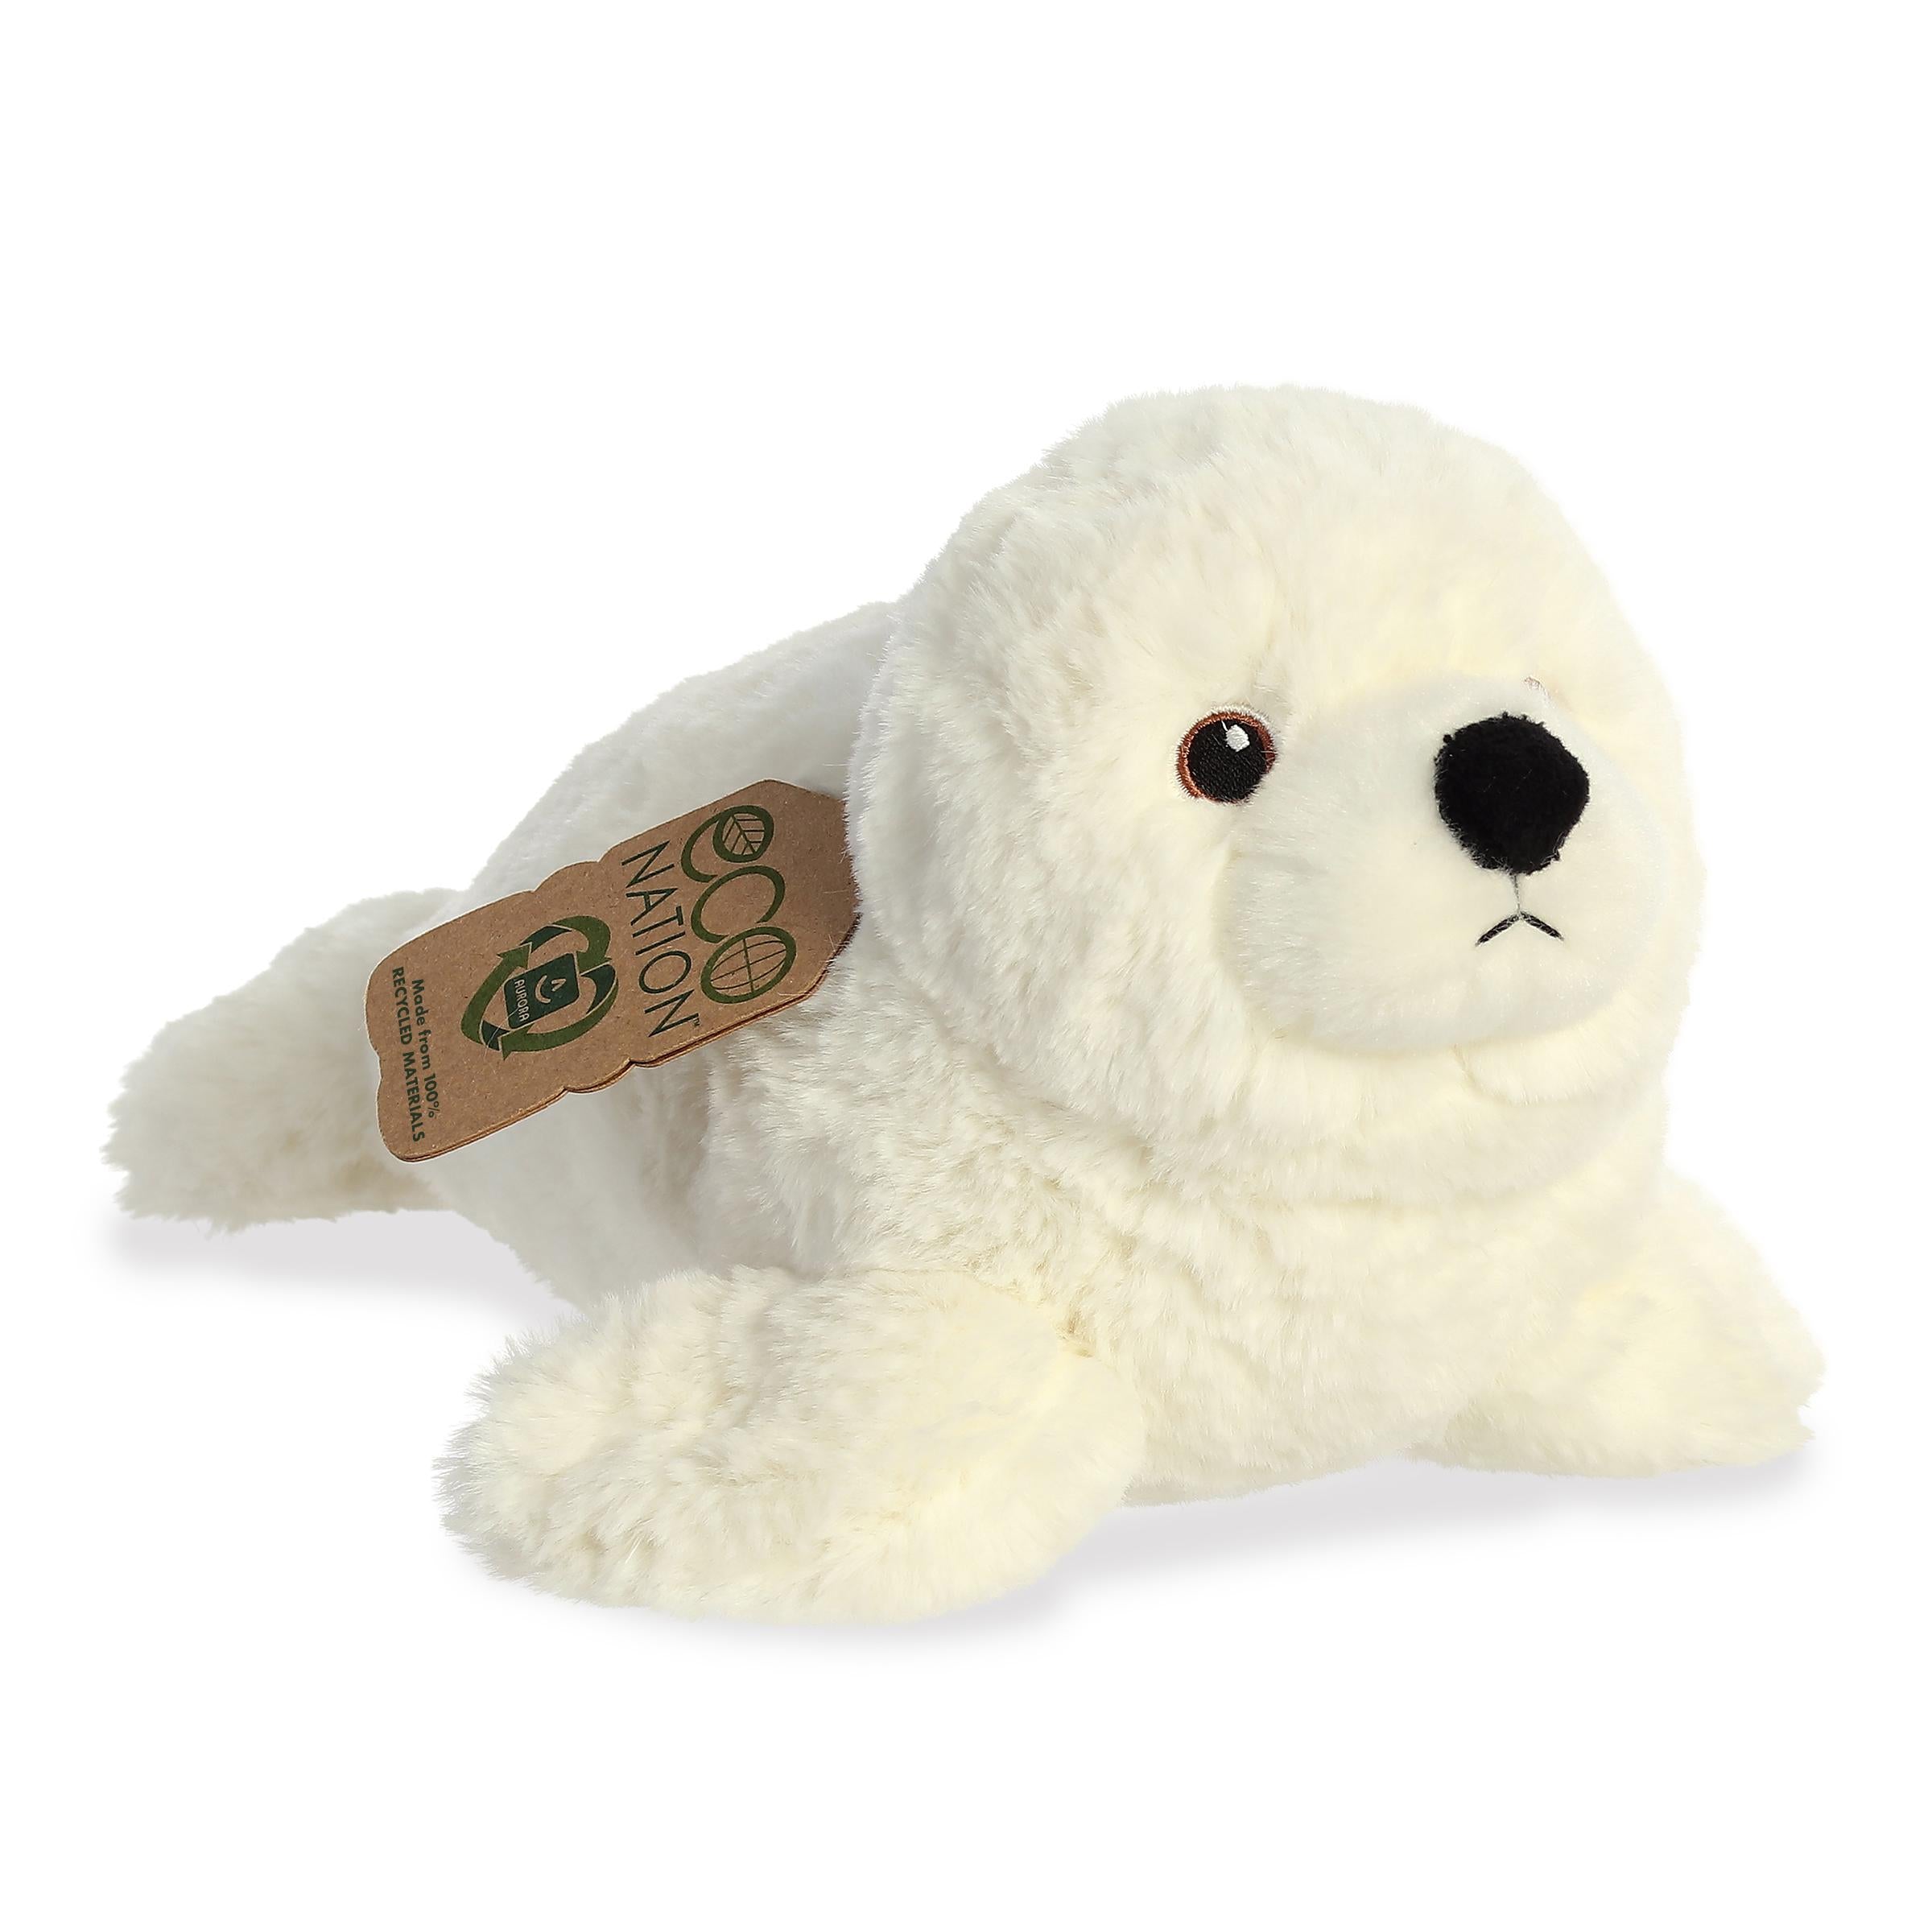 A fluffy seal plush with a pristine white coat, gentle embroidered eyes, and an eco-nation tag hanging from its neck